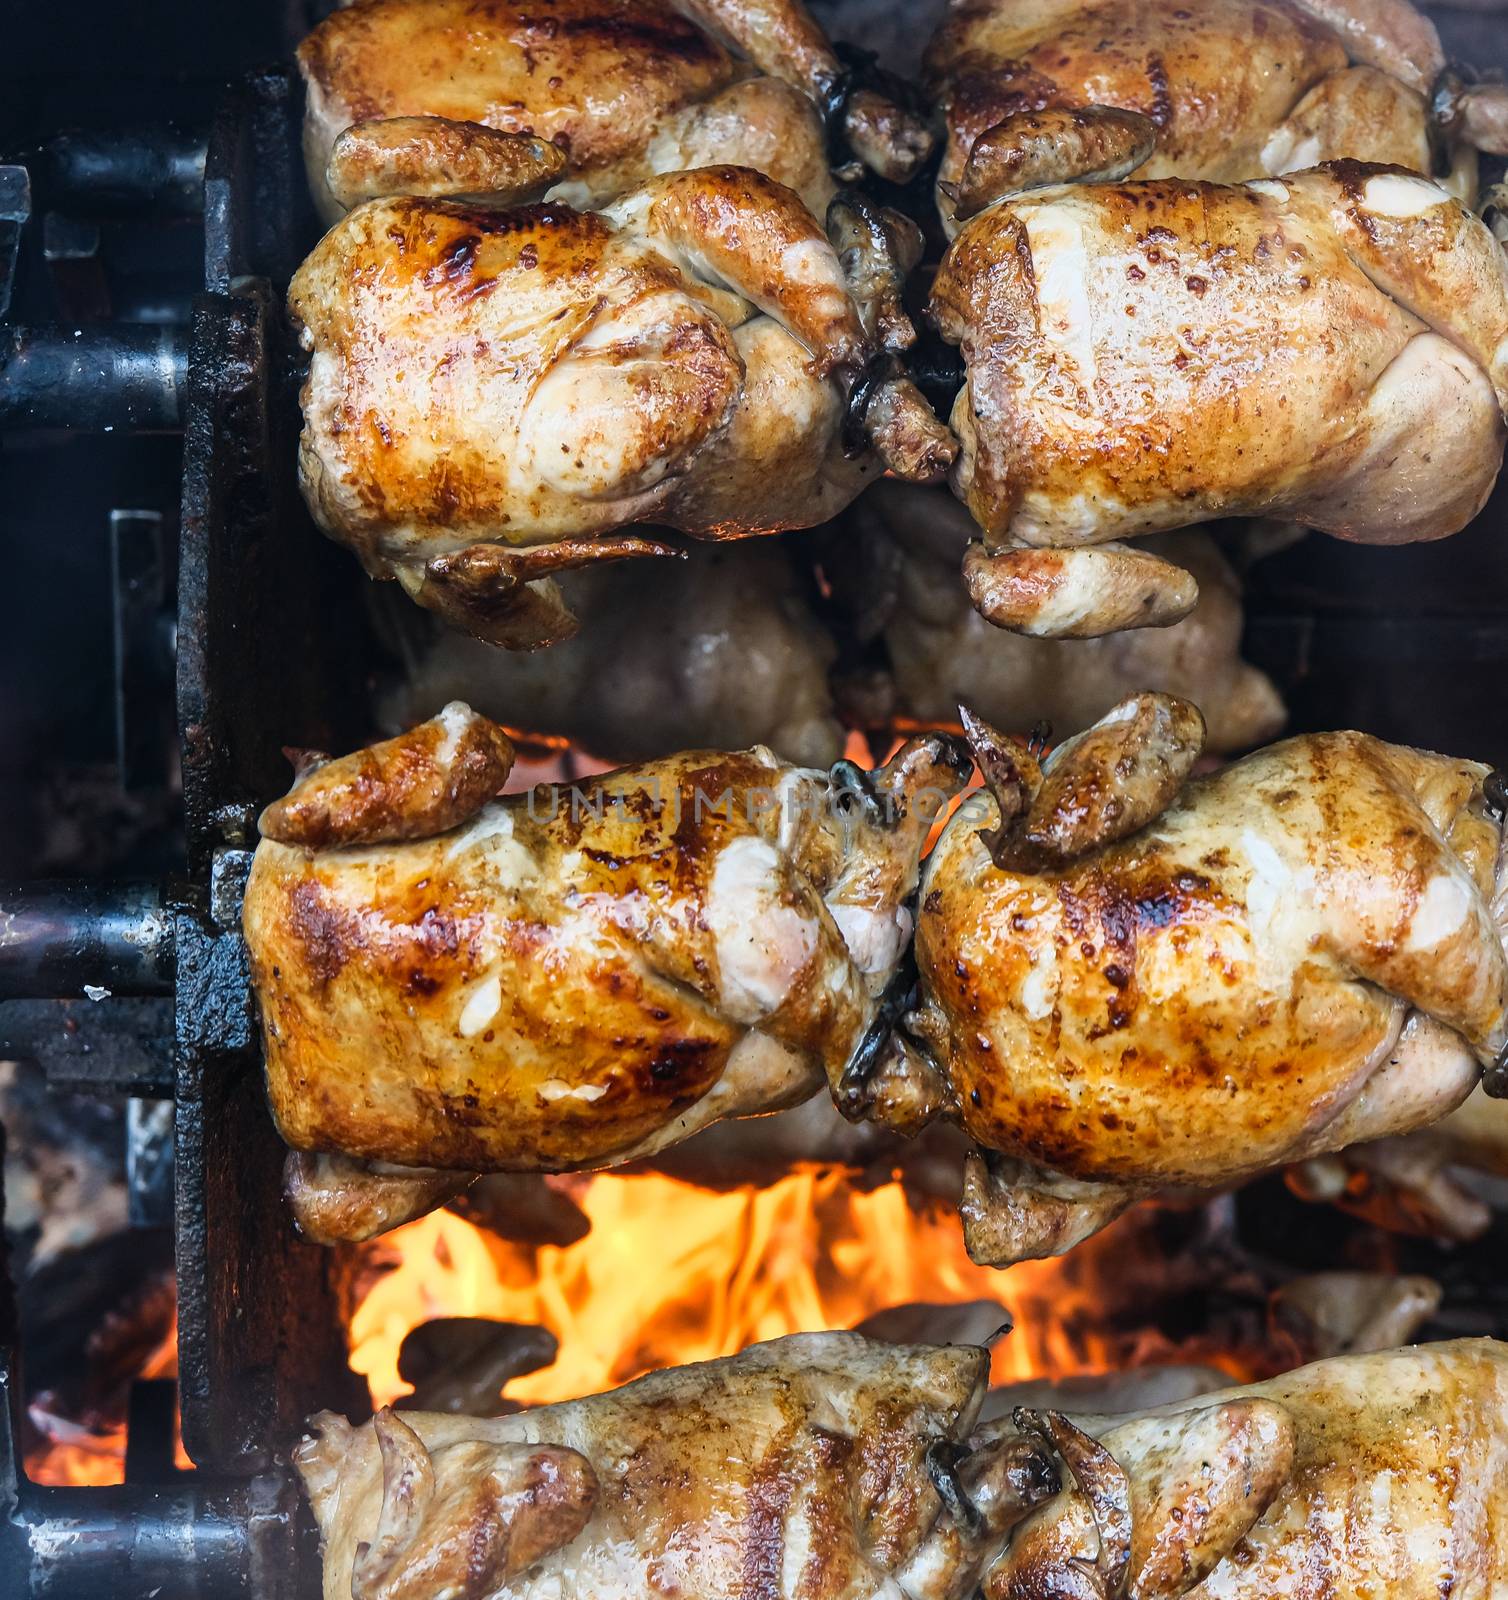 Whole Chickens Roasting on Open Flame